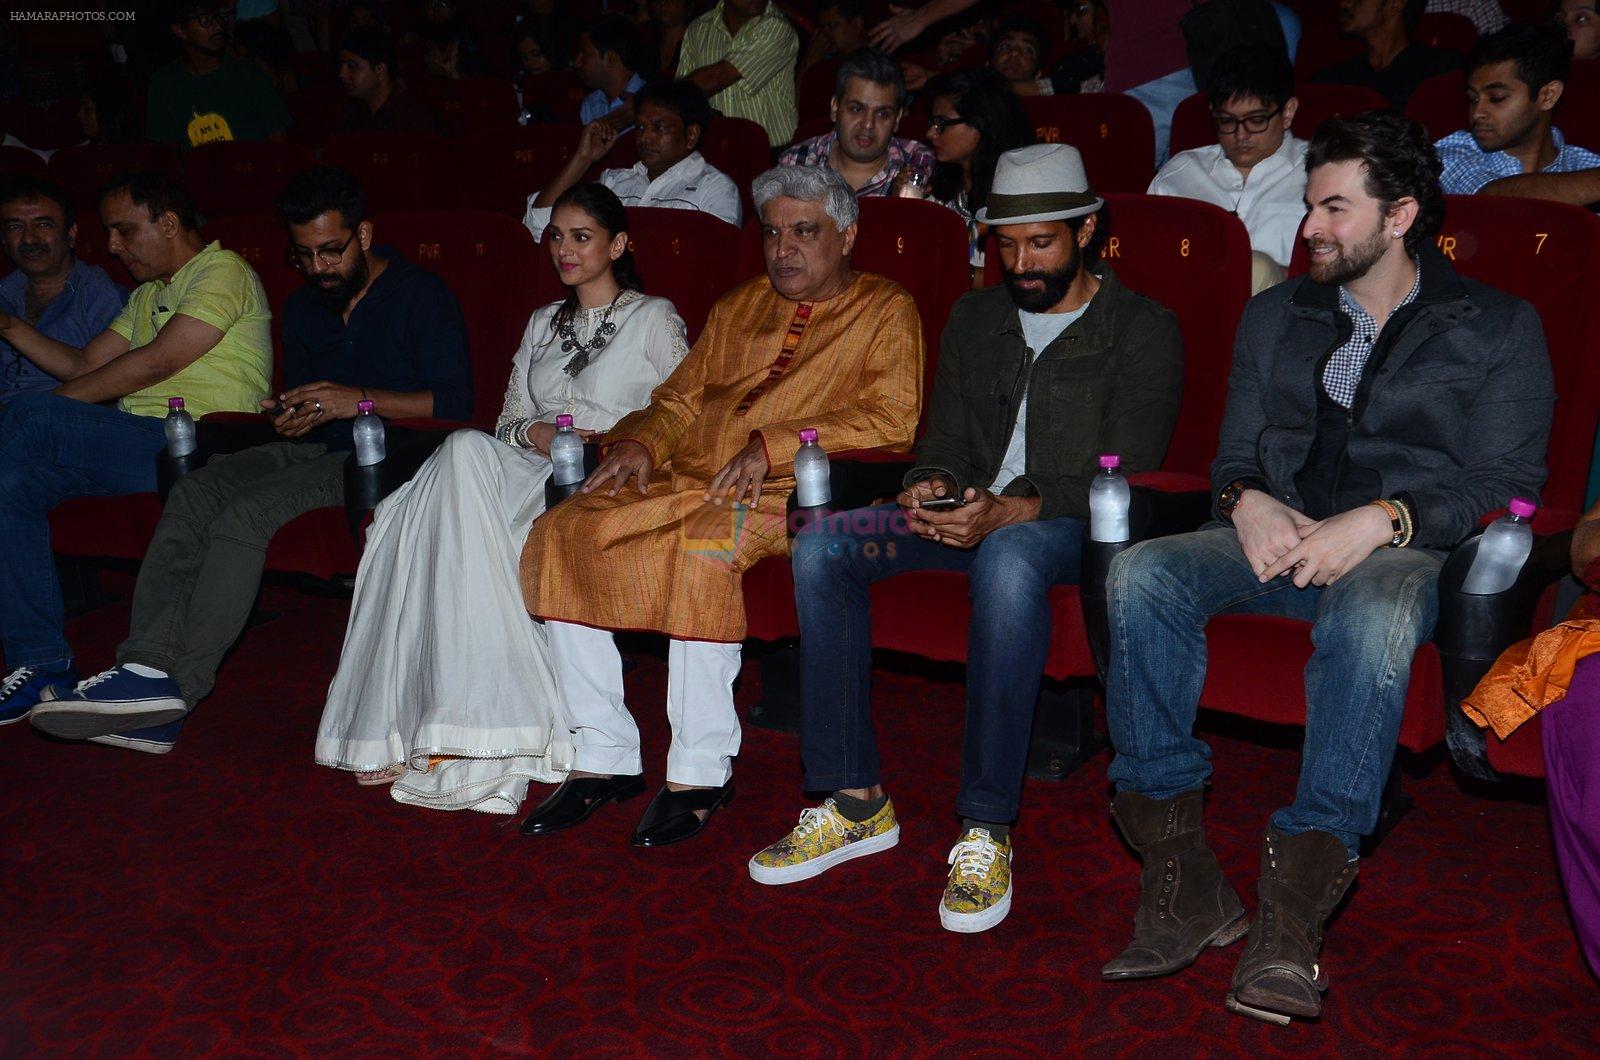 at Wazir trailor launch on 17th Nov 2015